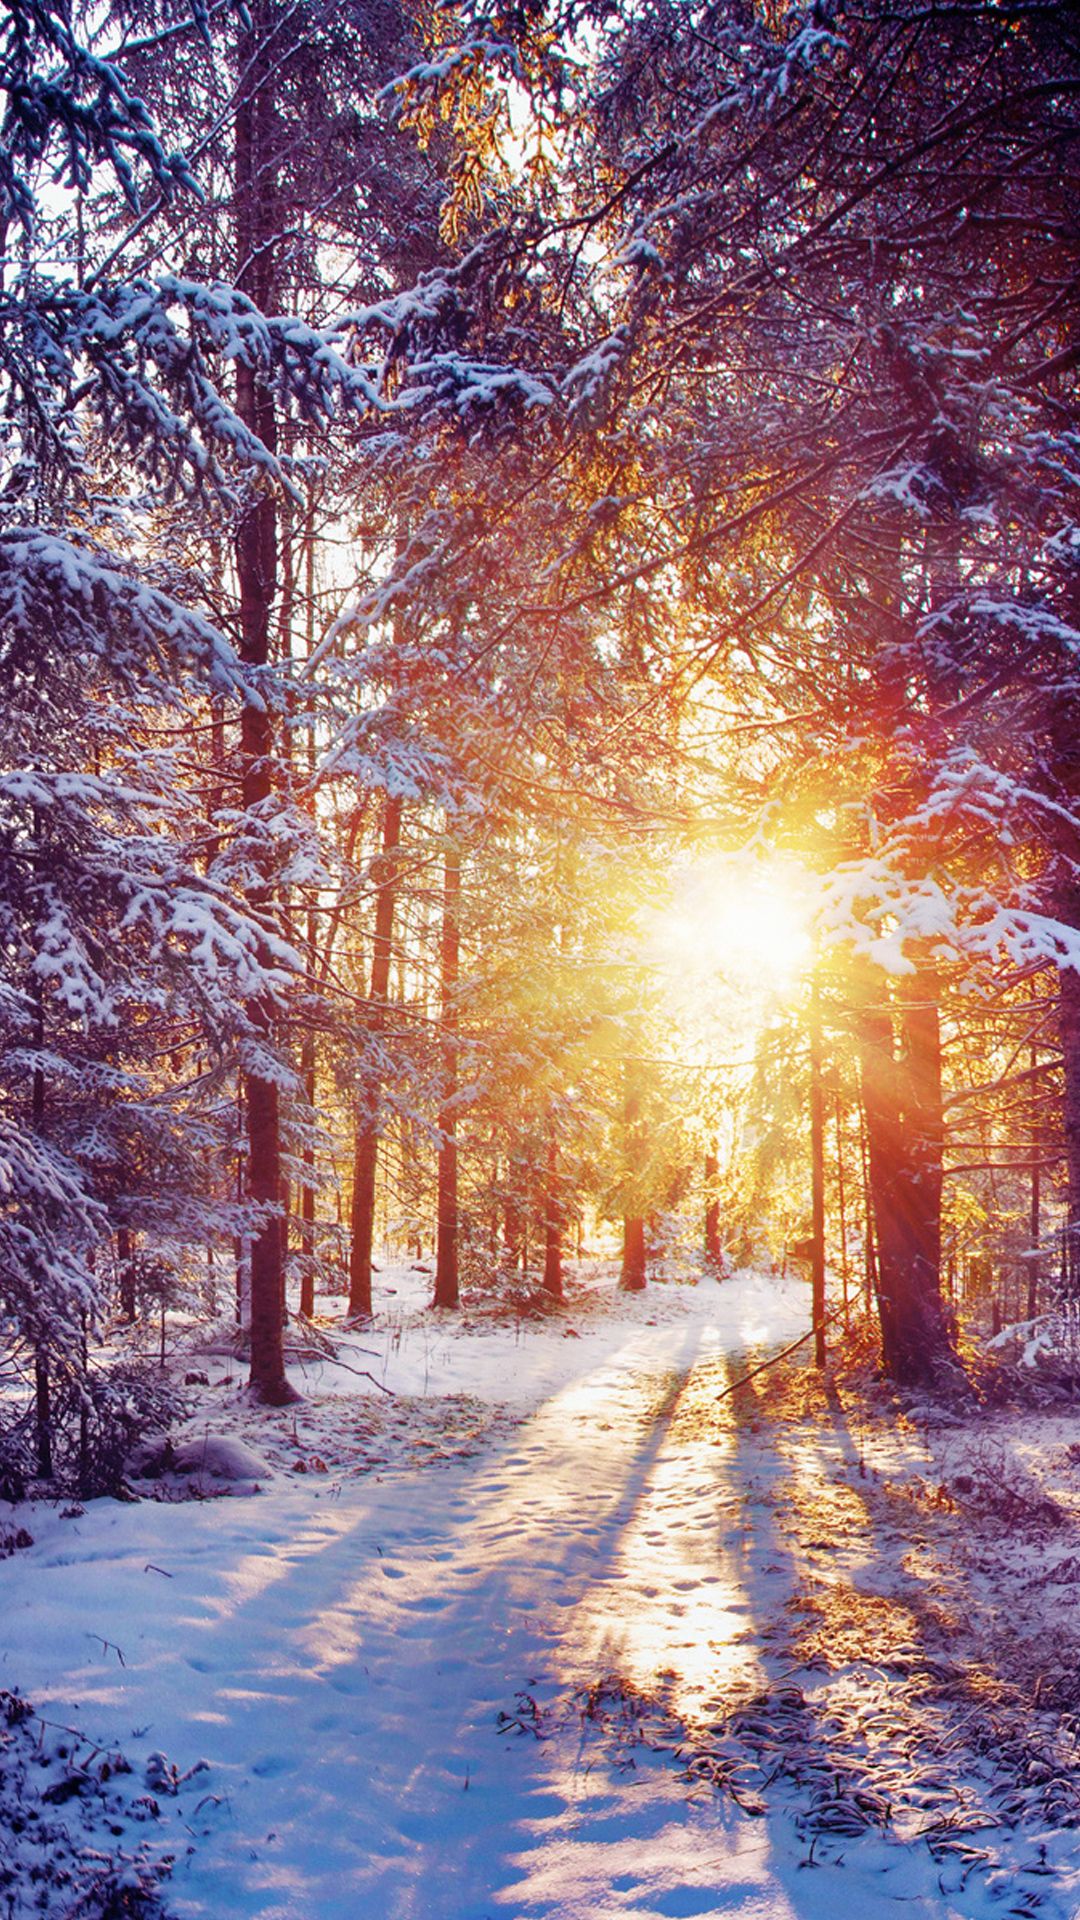  BEAUTIFUL NATURE WALLPAPER FREE TO DOWNLOAD Colors of Winter